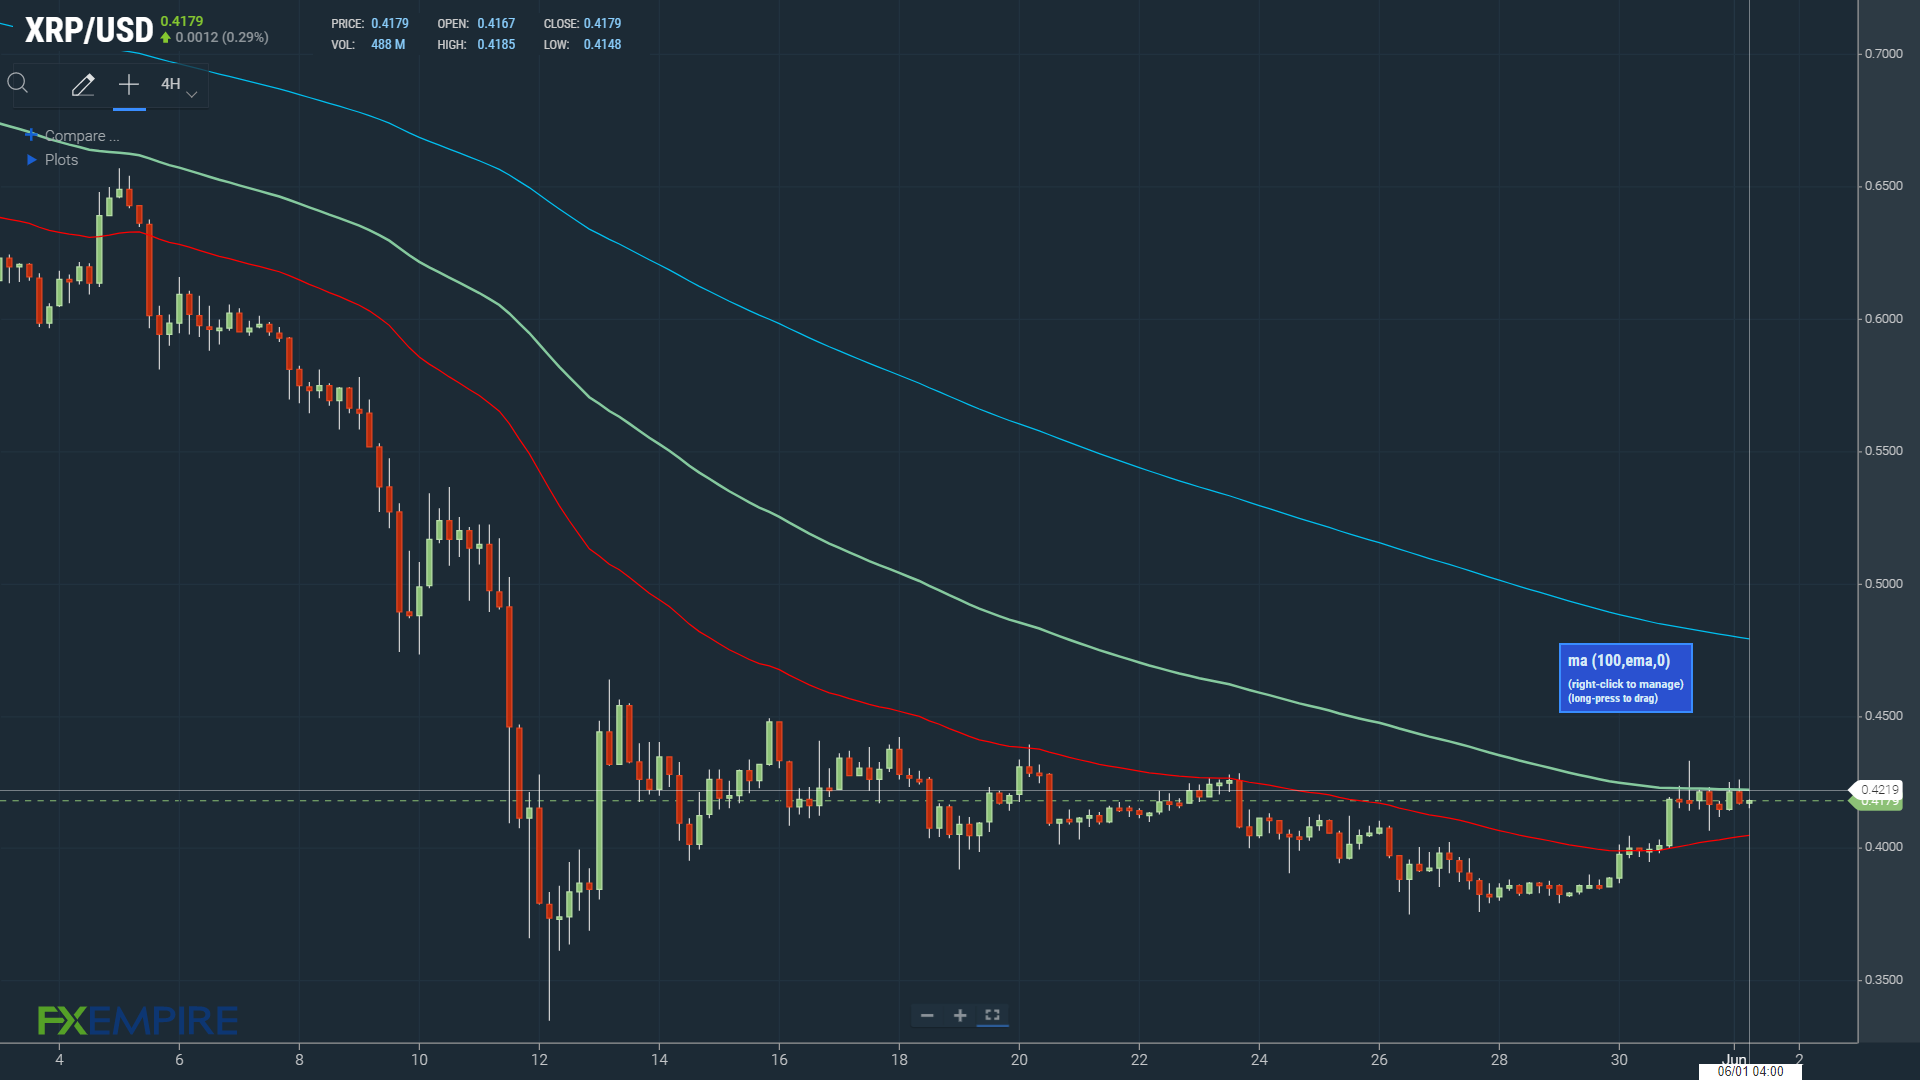 An XRP move through the 200-day EMA dependent on SEC v Ripple updates